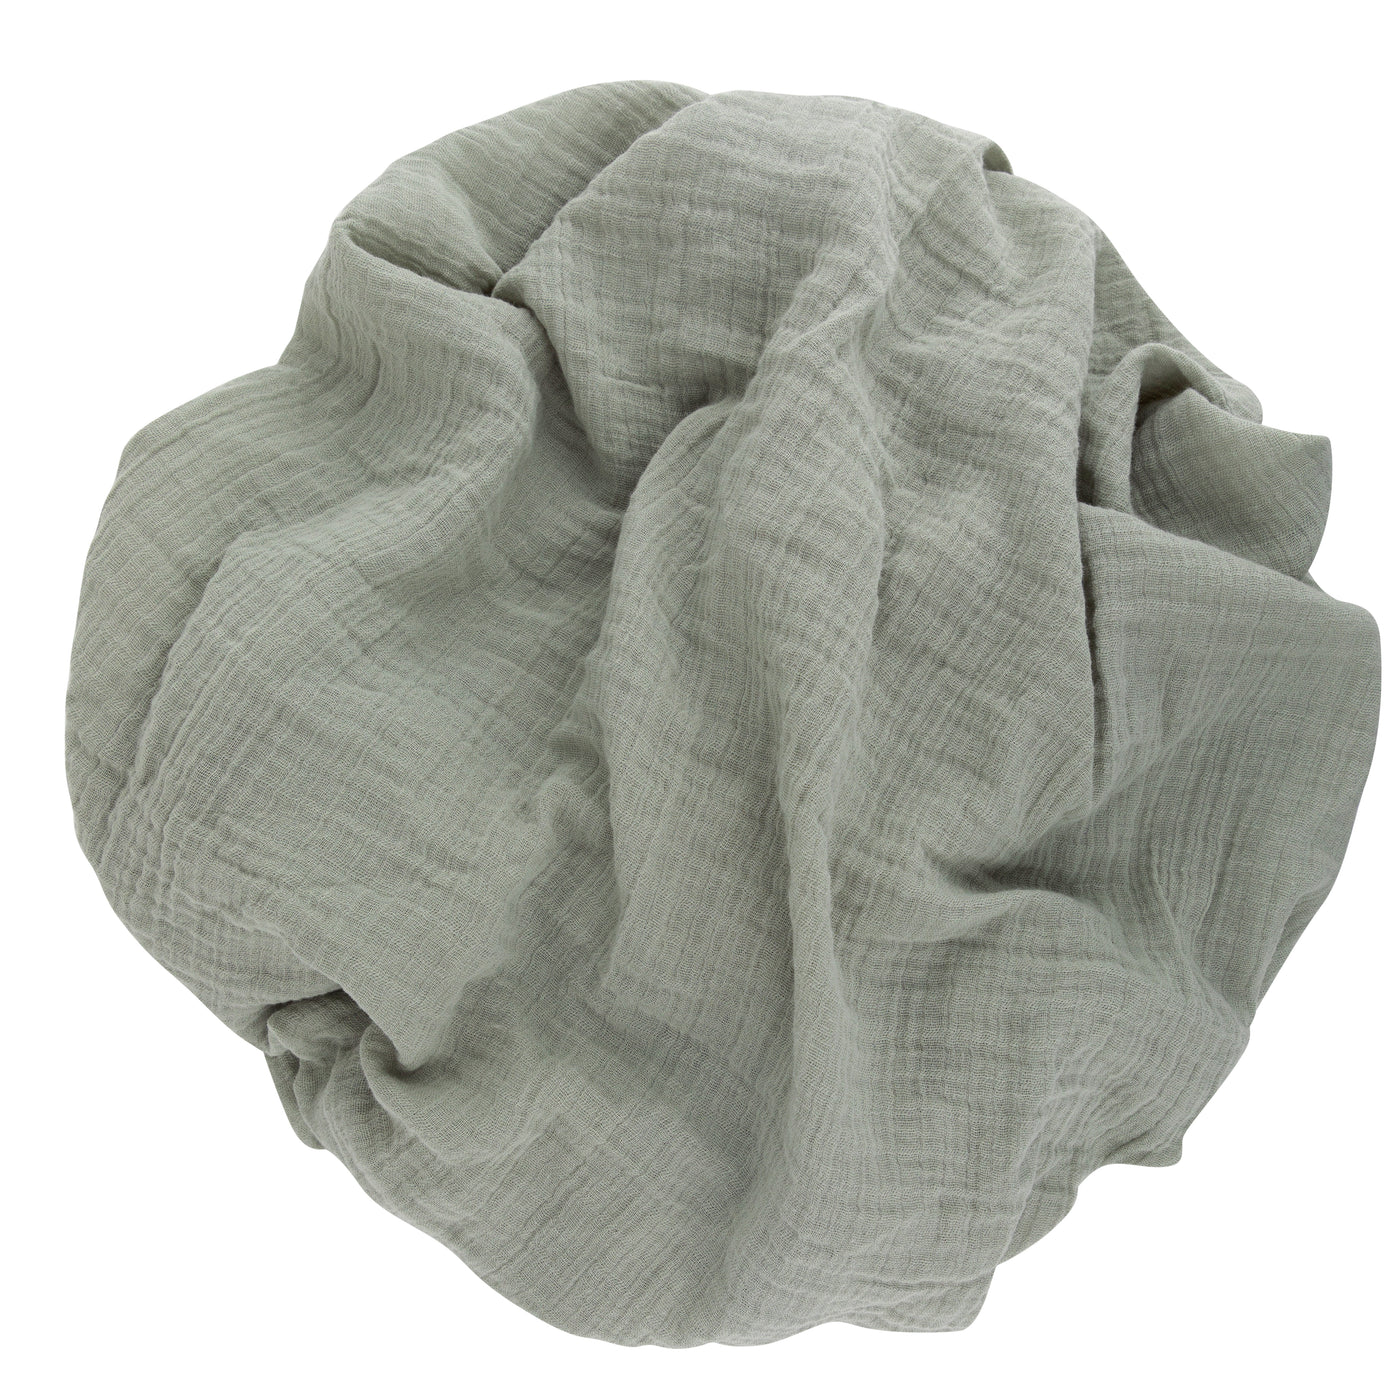 Ely's & Co. Muslin Swaddle Two Pack - Eucalyptus Collection